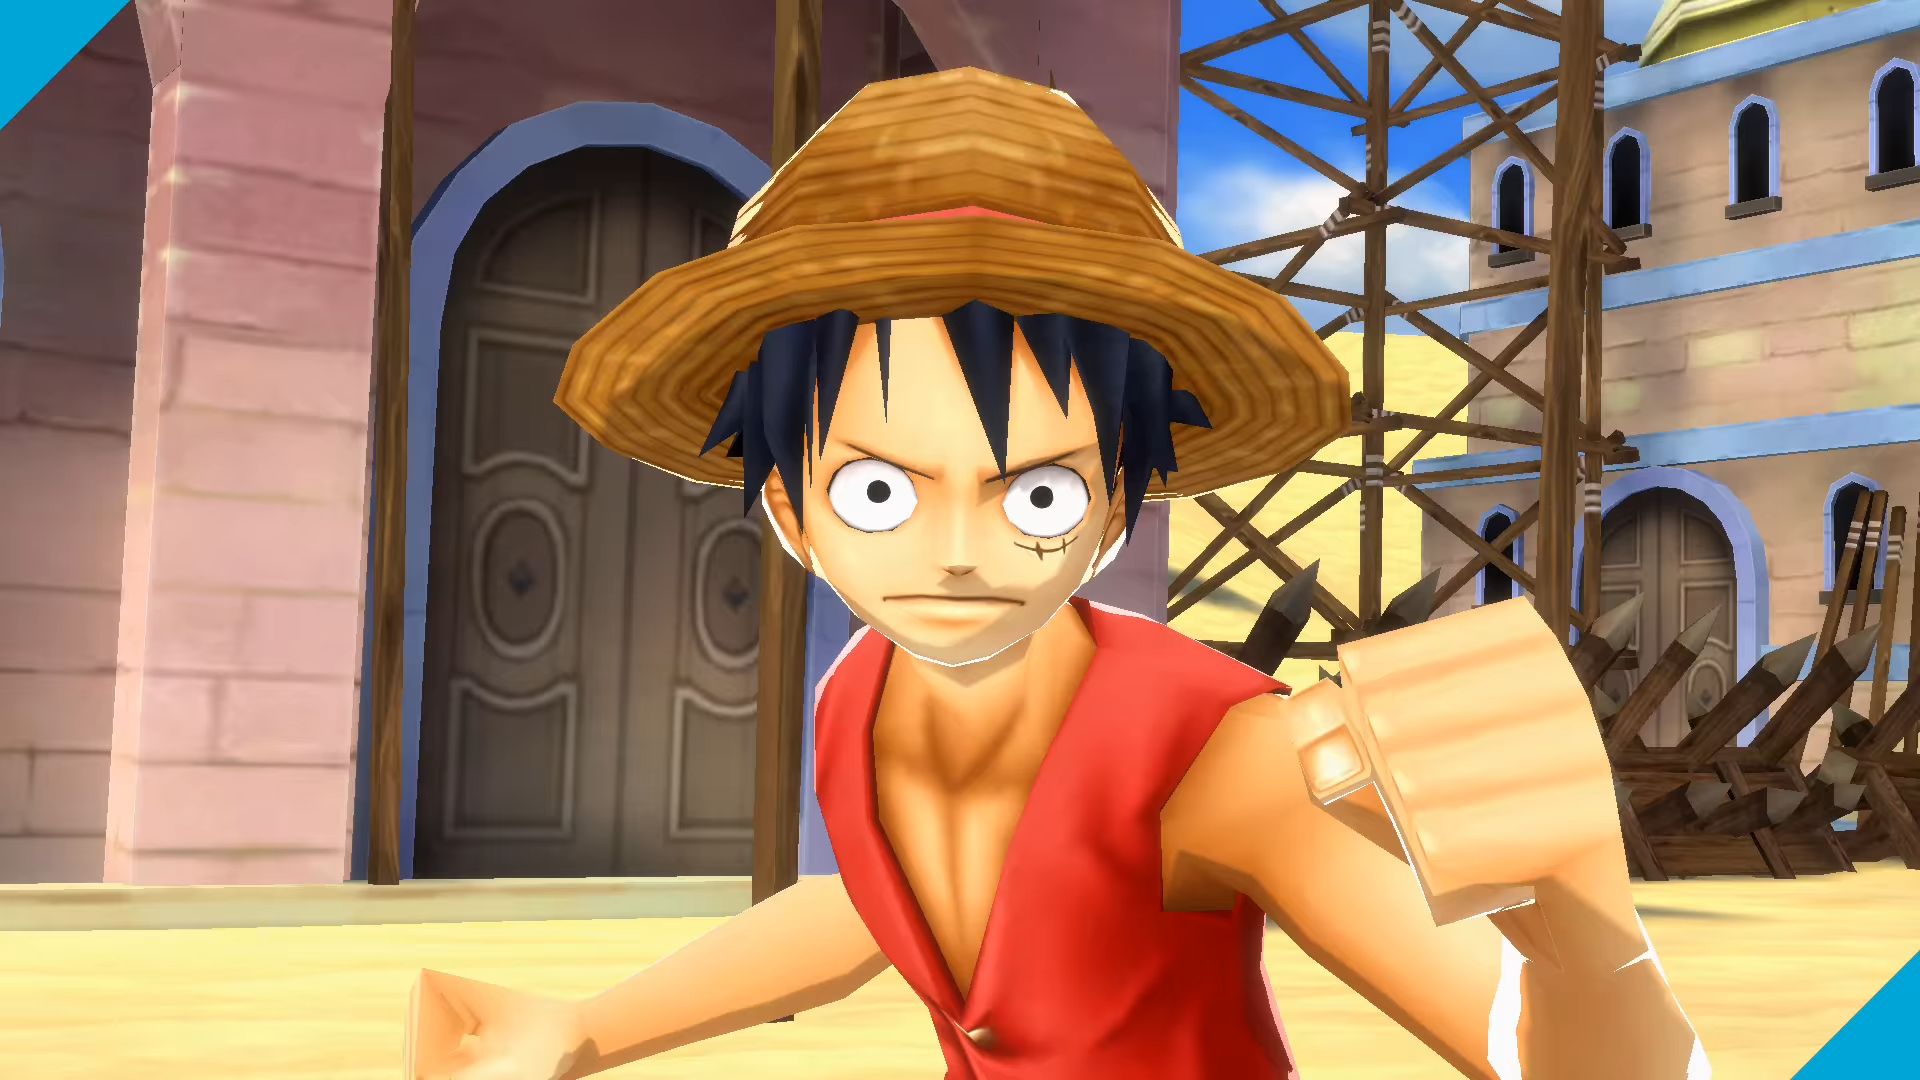 ONE PIECE Bounty Rush Apk Mod All Unlocked, Direct Download